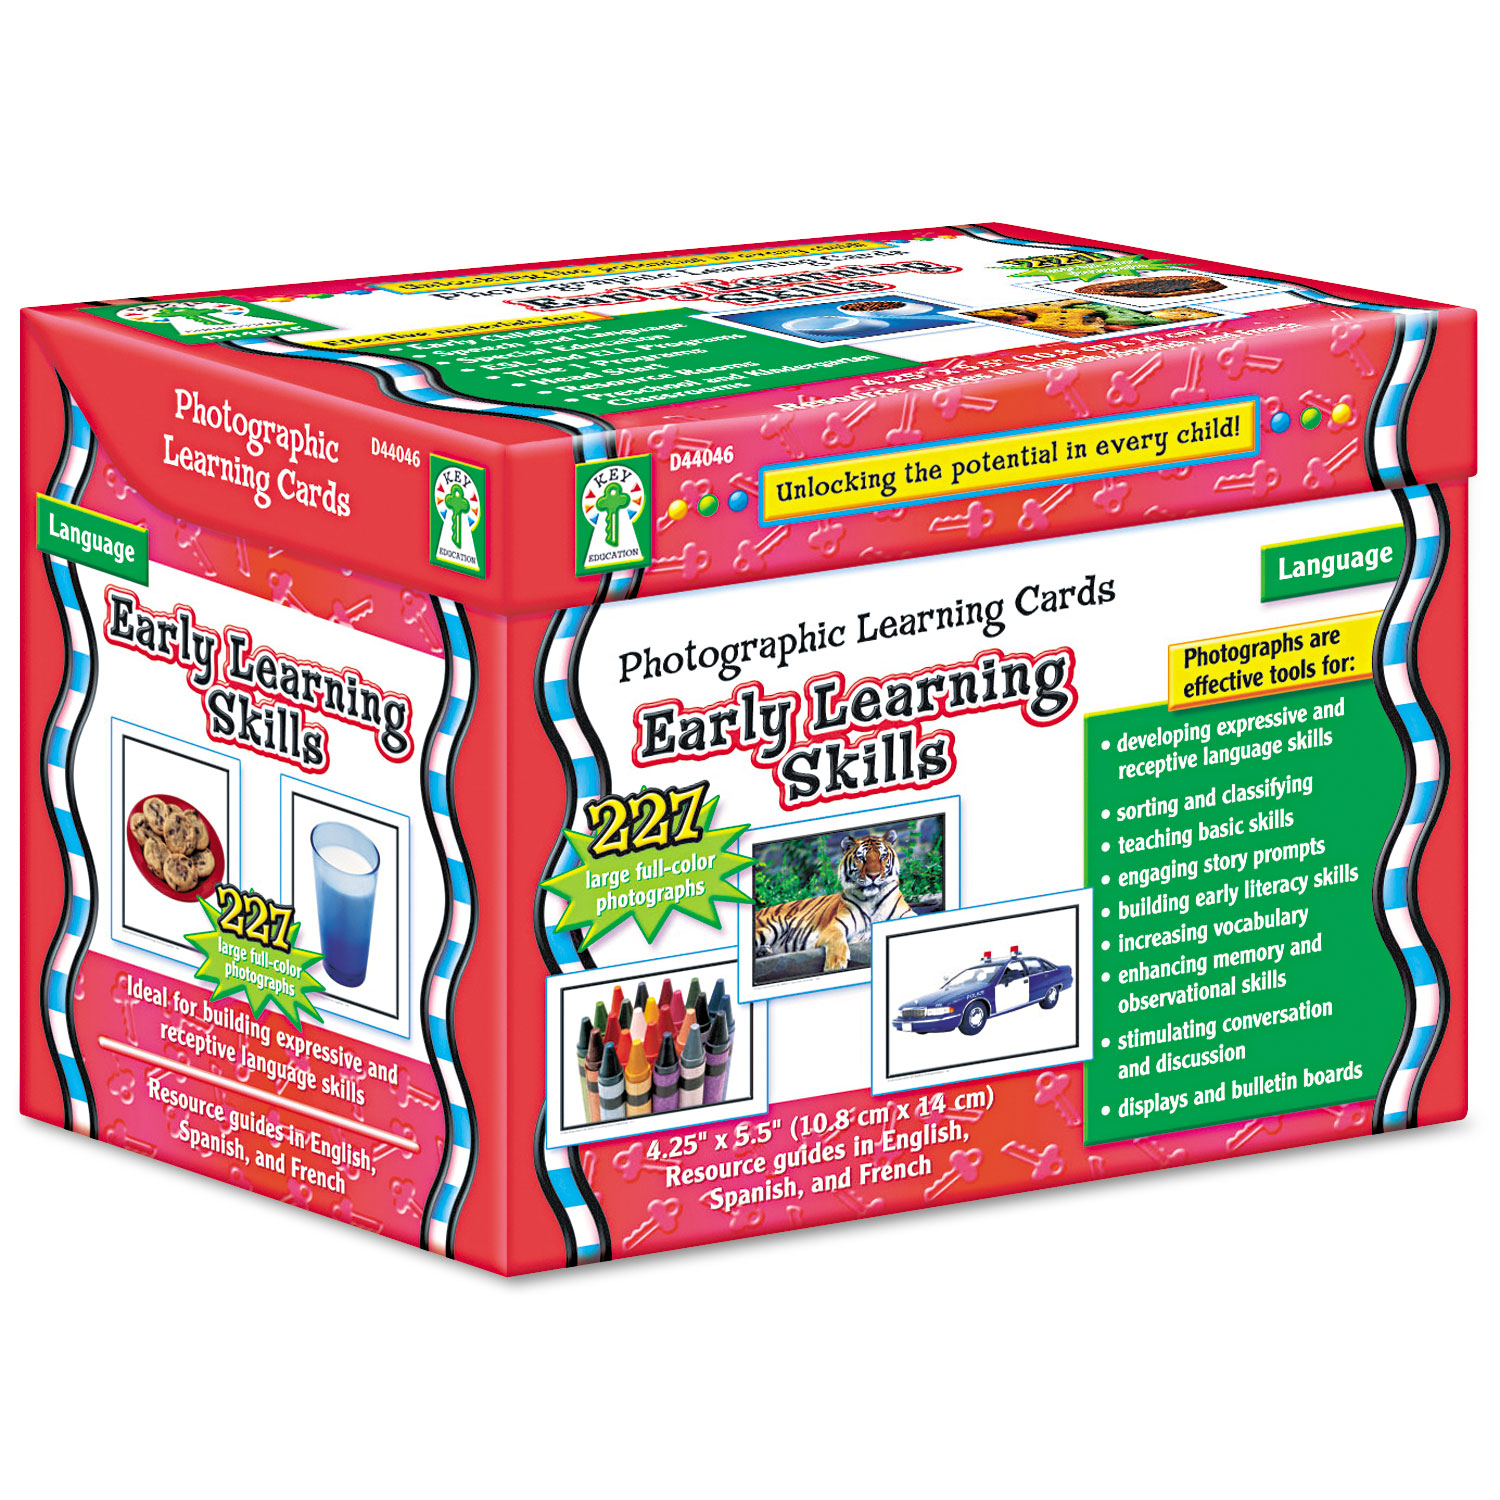 Photographic Learning Cards Boxed Set, Early Learning Skills, Grades K-12